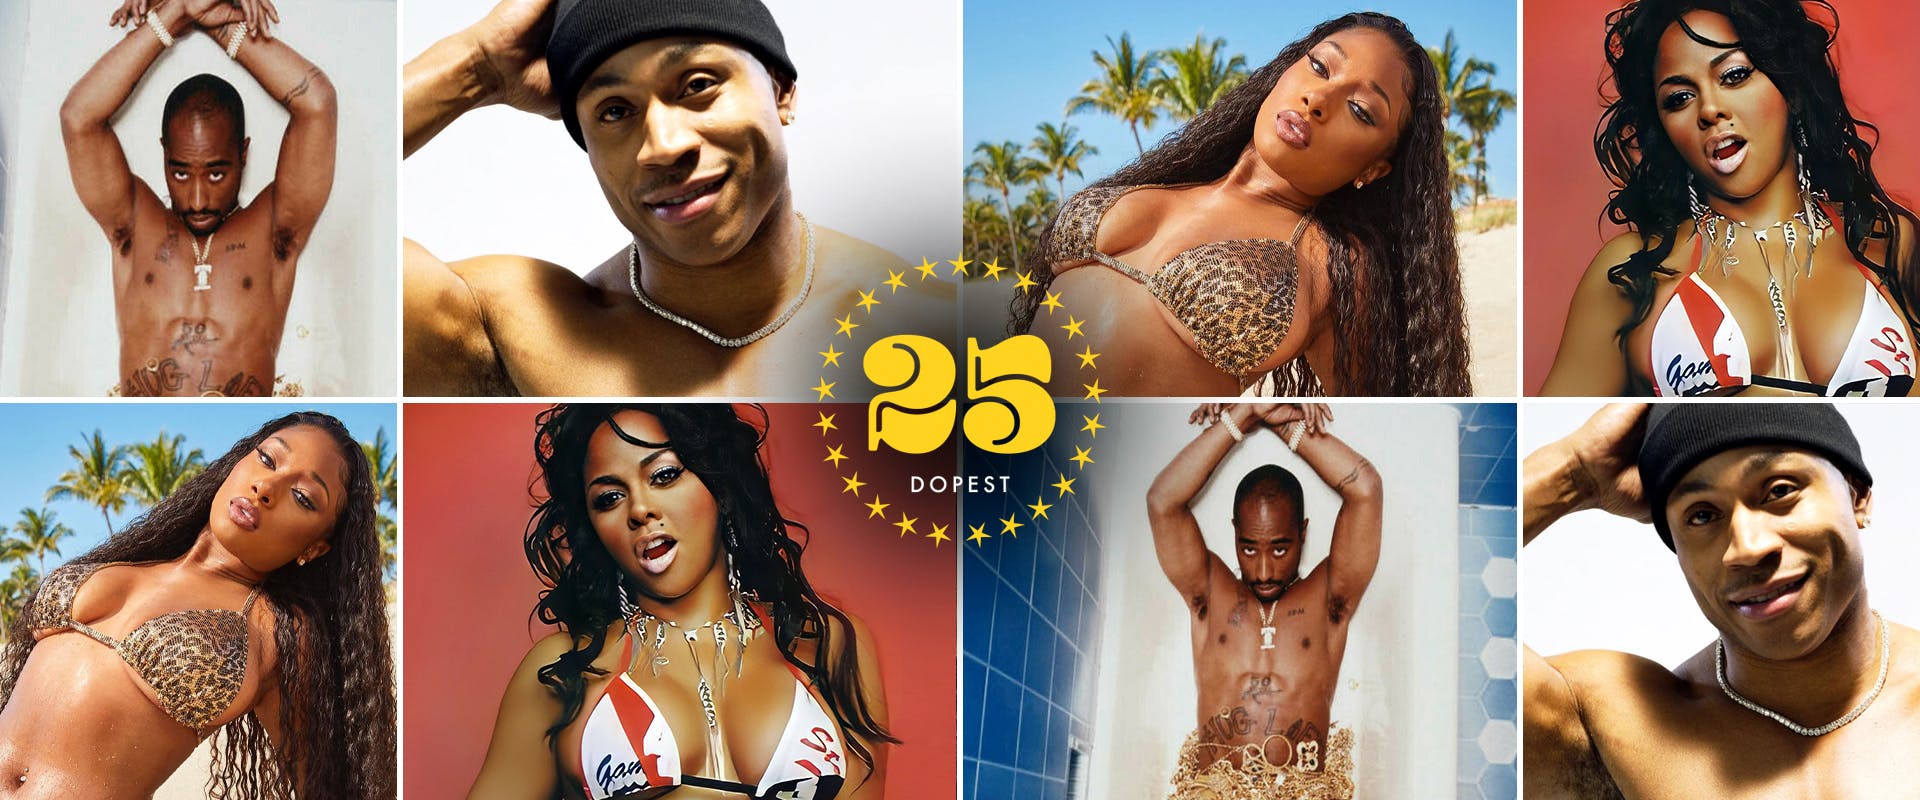 Xxx Song Ke Sat - How Many Licks: The 25 Dopest Rap Songs to F*** To